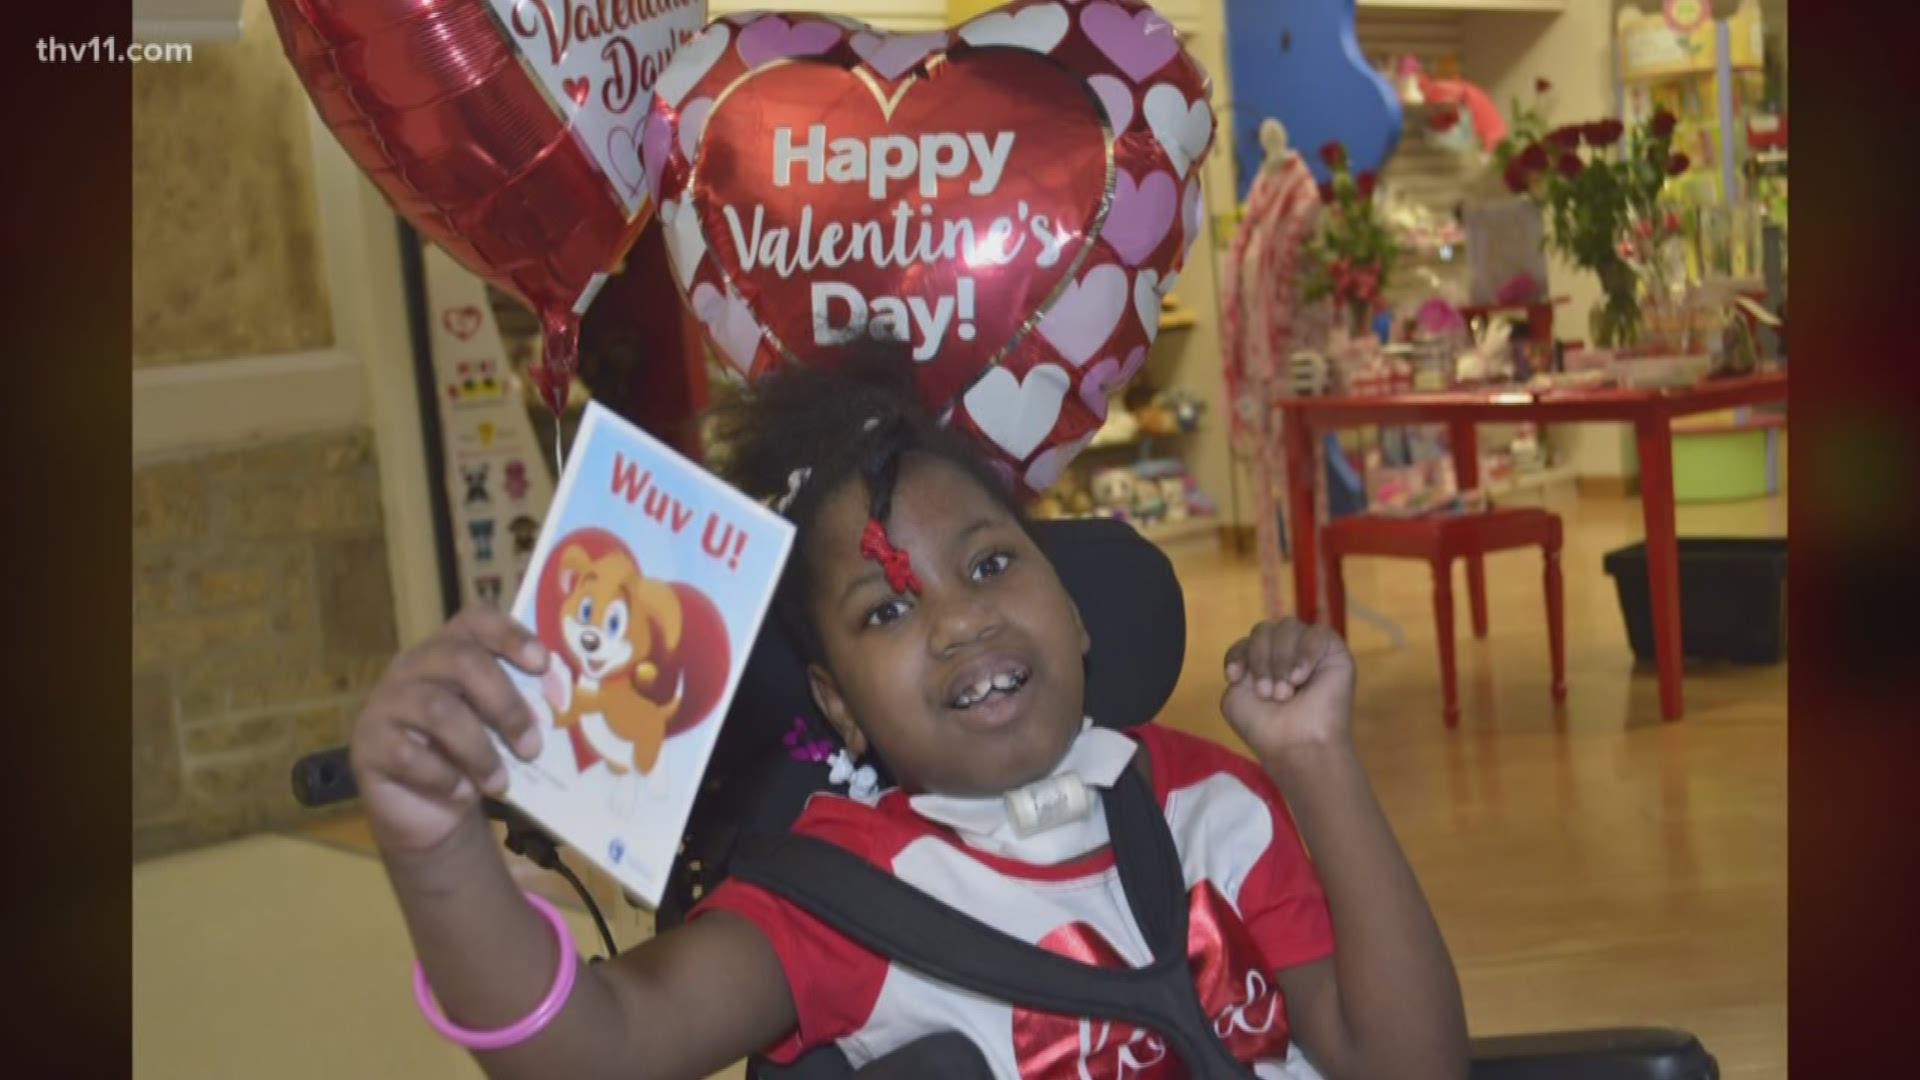 You can donate art supplies and send Valentine's Day cards to kids at ACH.